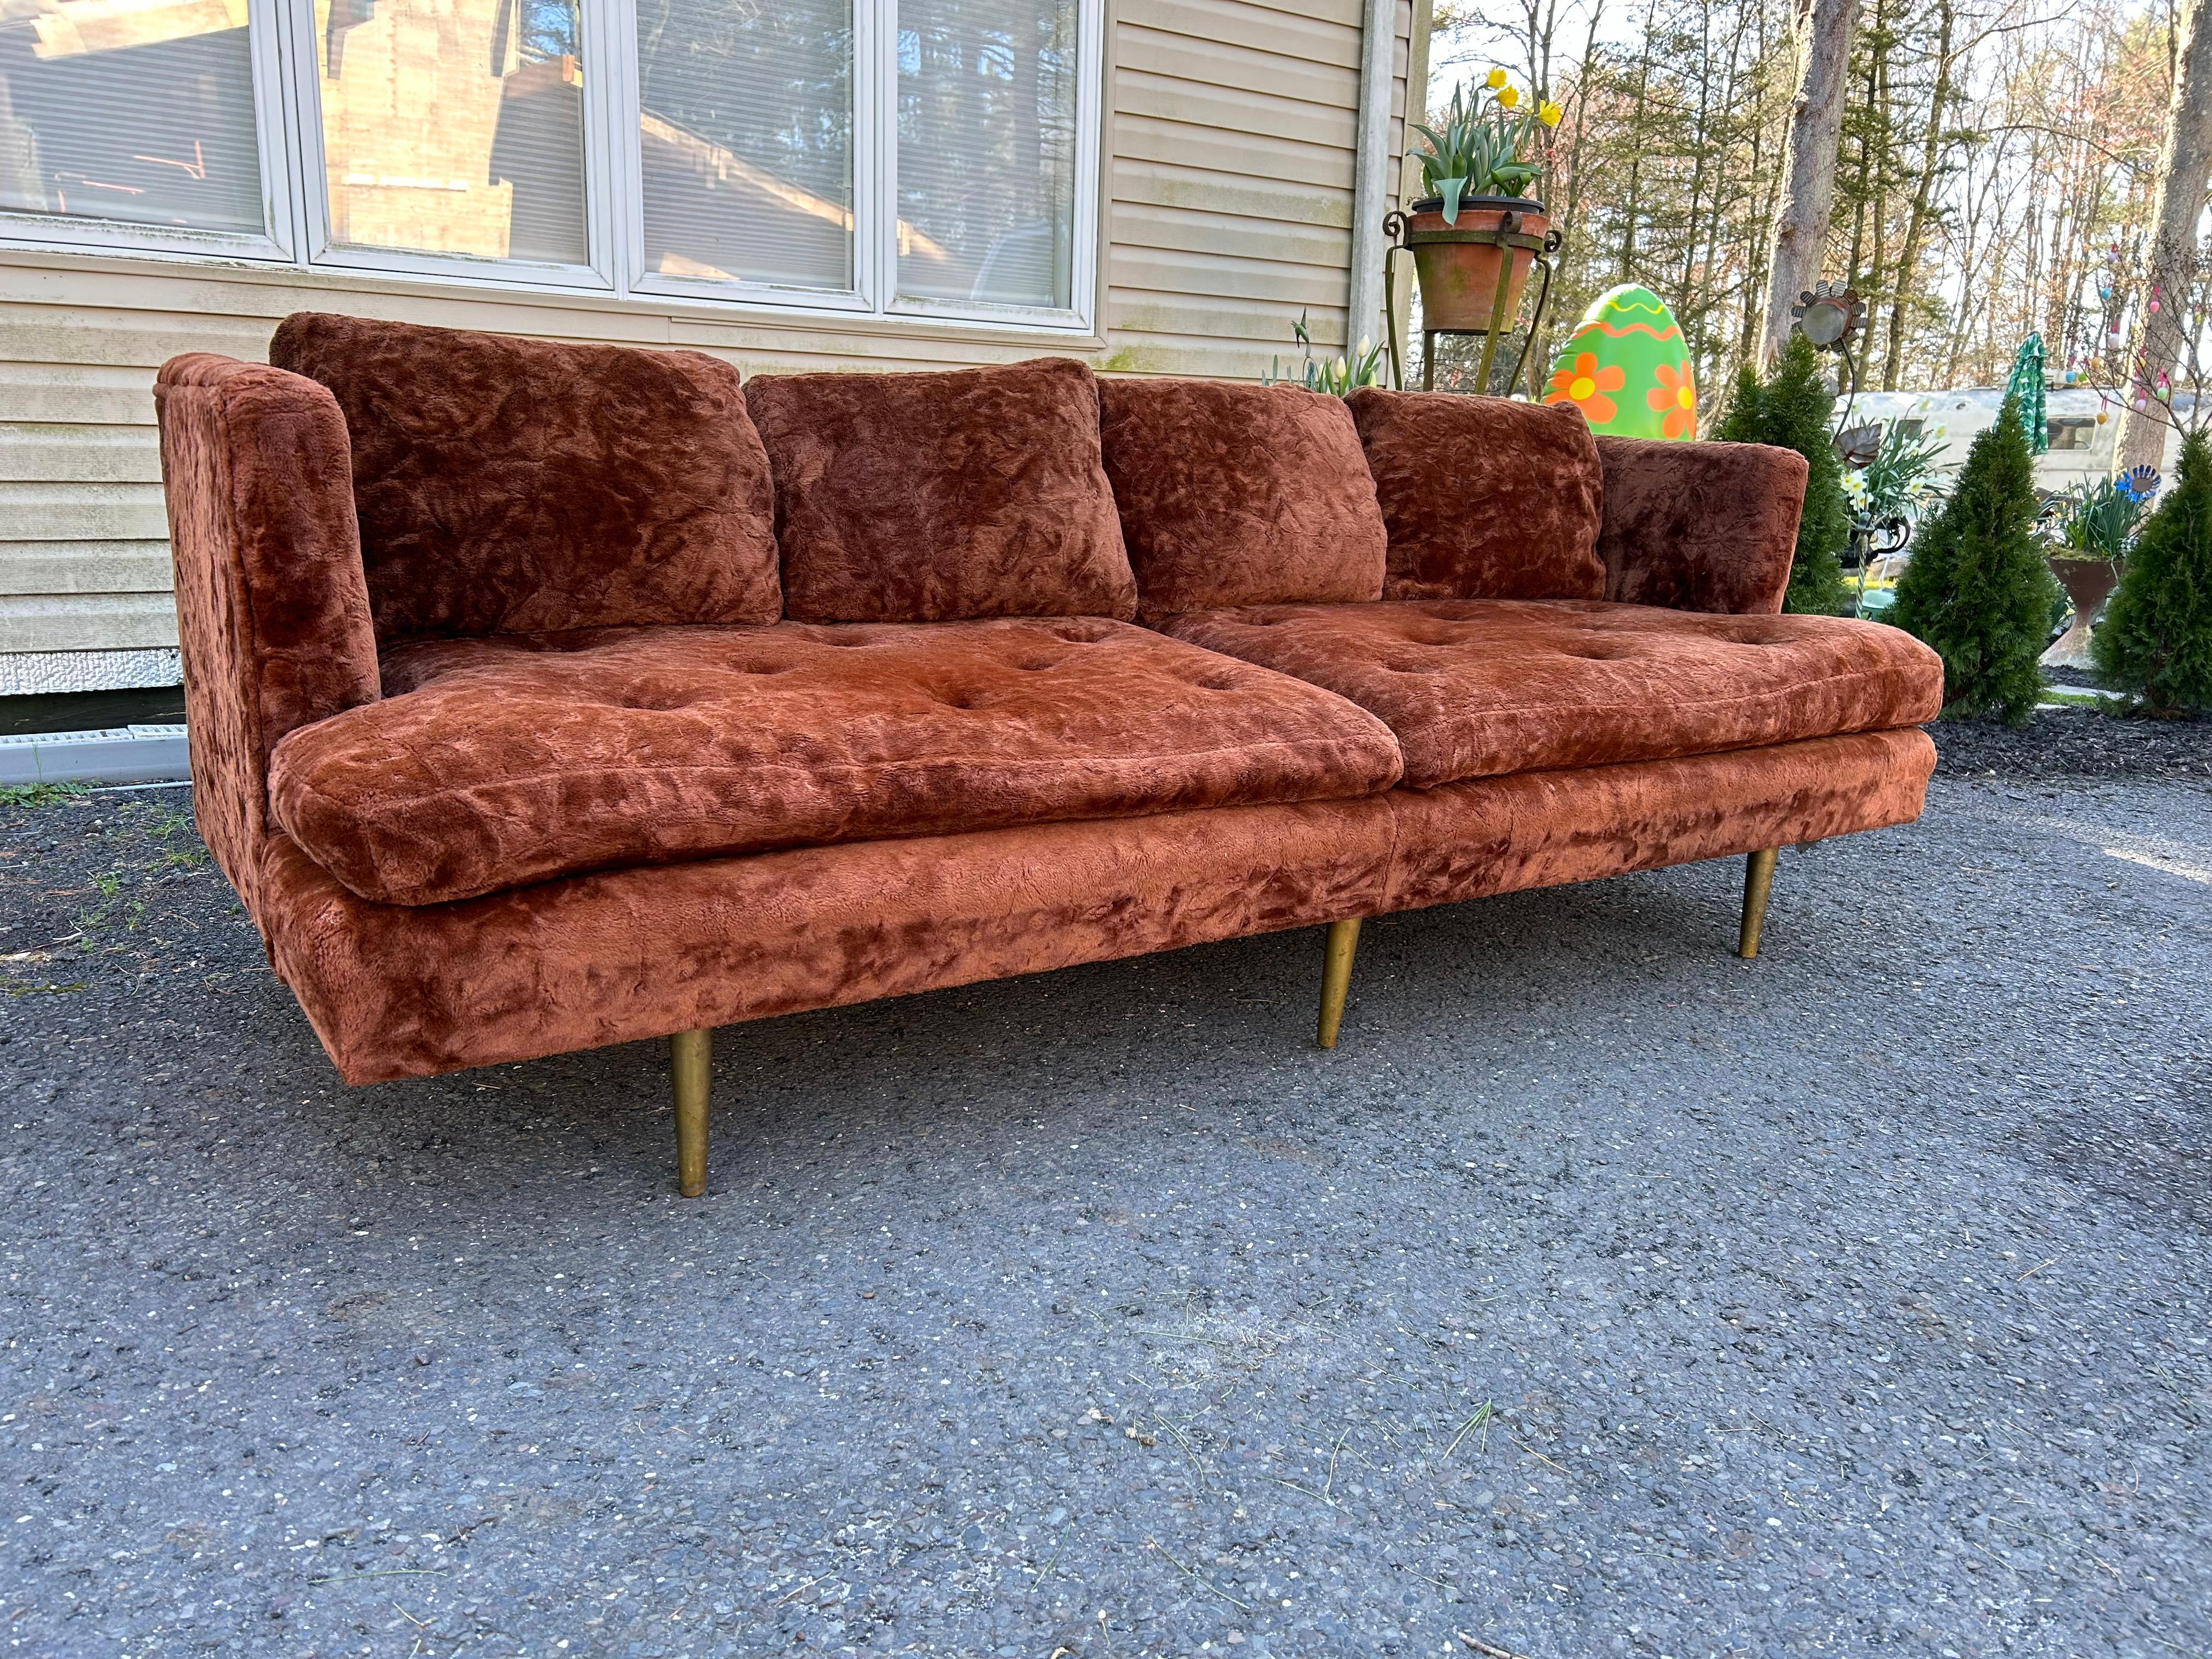 Handsome even arm sofa by Edward Wormley for Dunbar with brass legs. Model 4906. This piece retains its original fun fur teddy bear fabric in usable condition.  The foam in cushions has flattened but the back pillows are down filled and still plump.